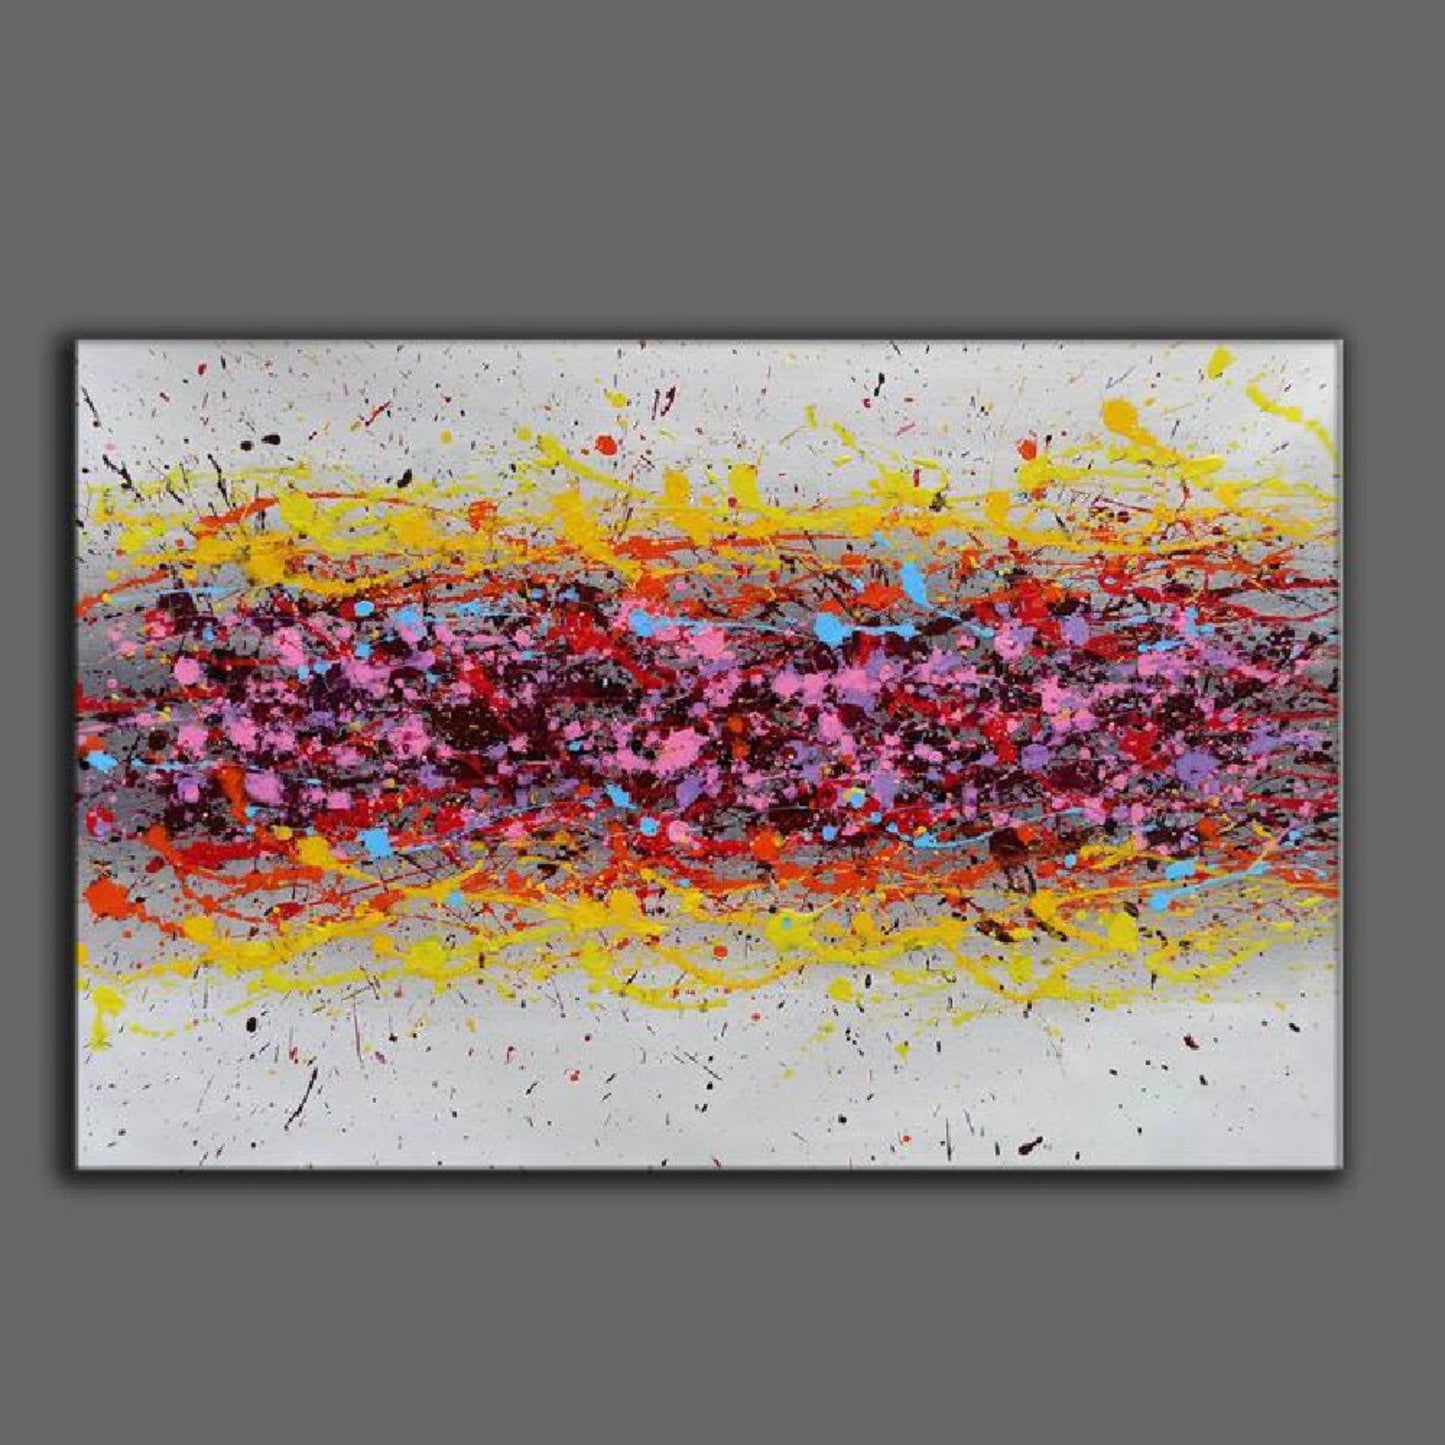 Acrylic Red Pollock Dripping Original Oil Painting